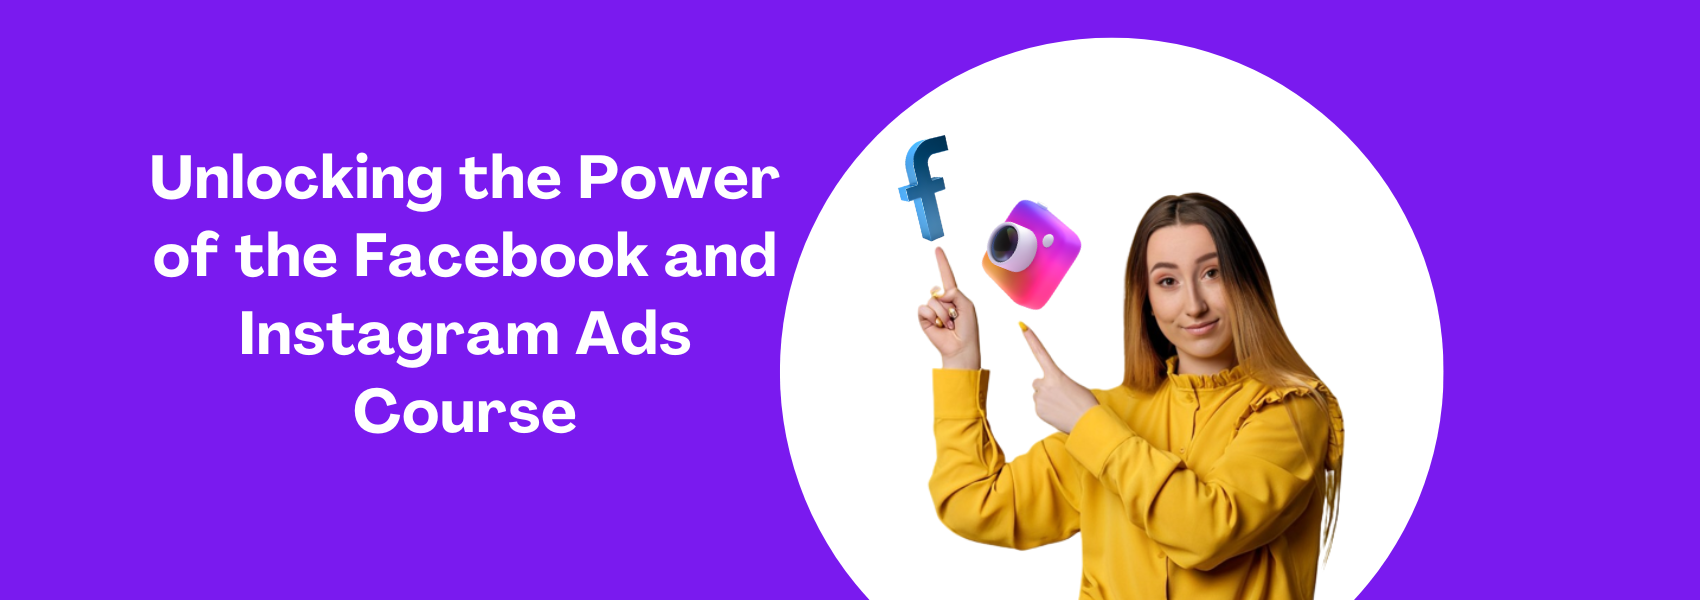 Unlocking The Power Of Facebook And Instagram Ads